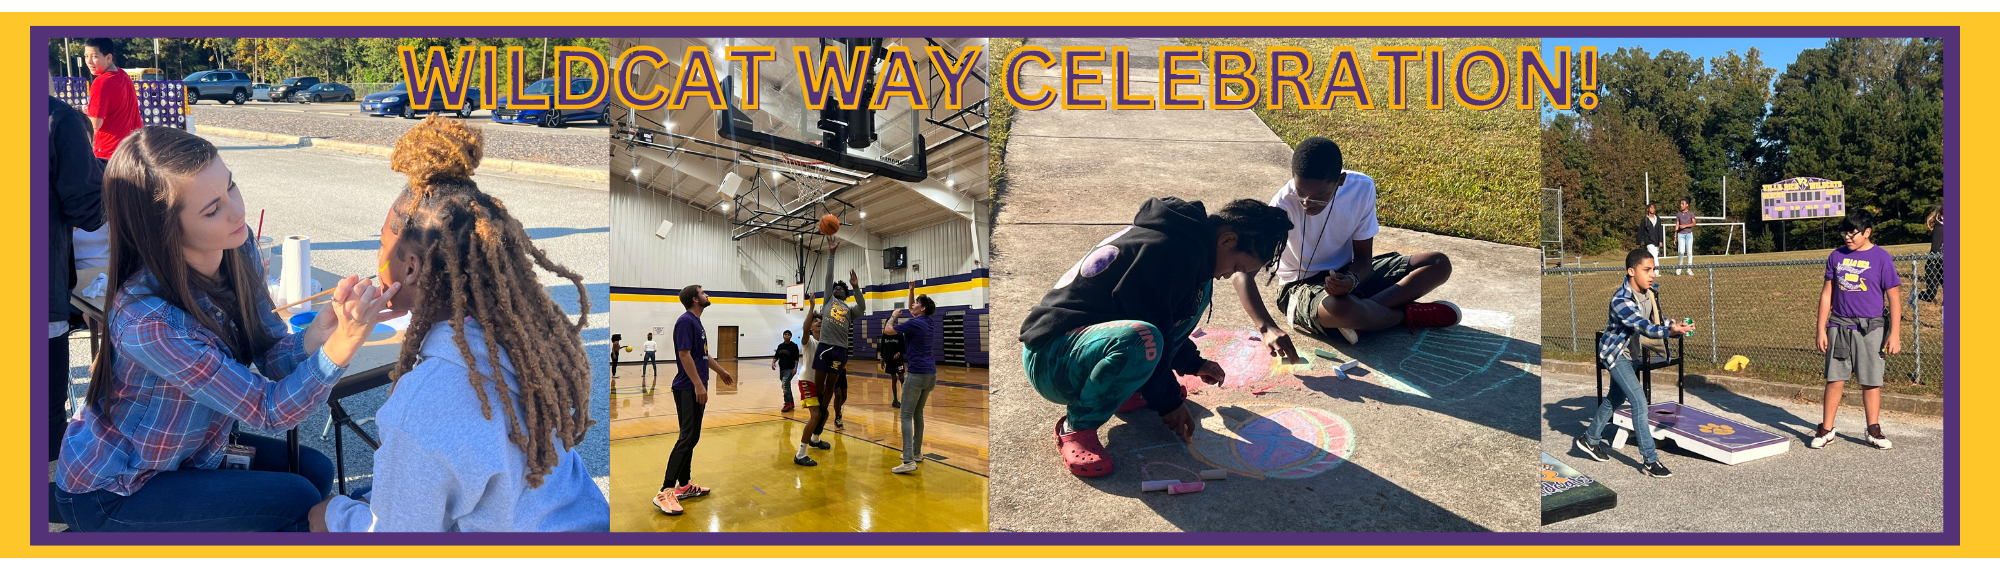 wildcat way celebration with students doing fun activiies